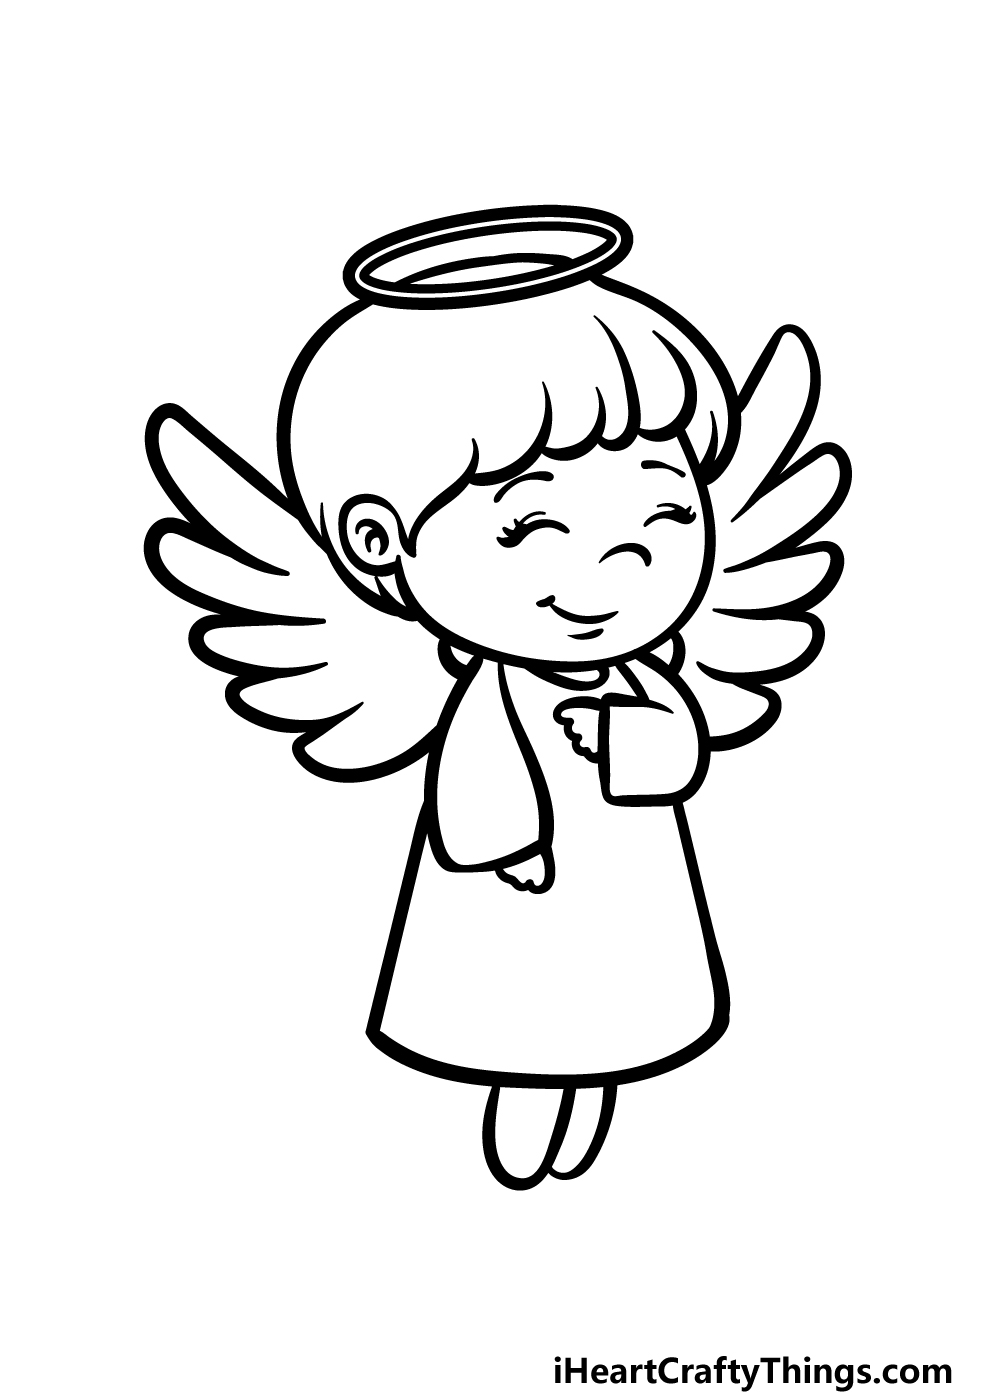 benji wong recommends how to draw cartoon angel pic